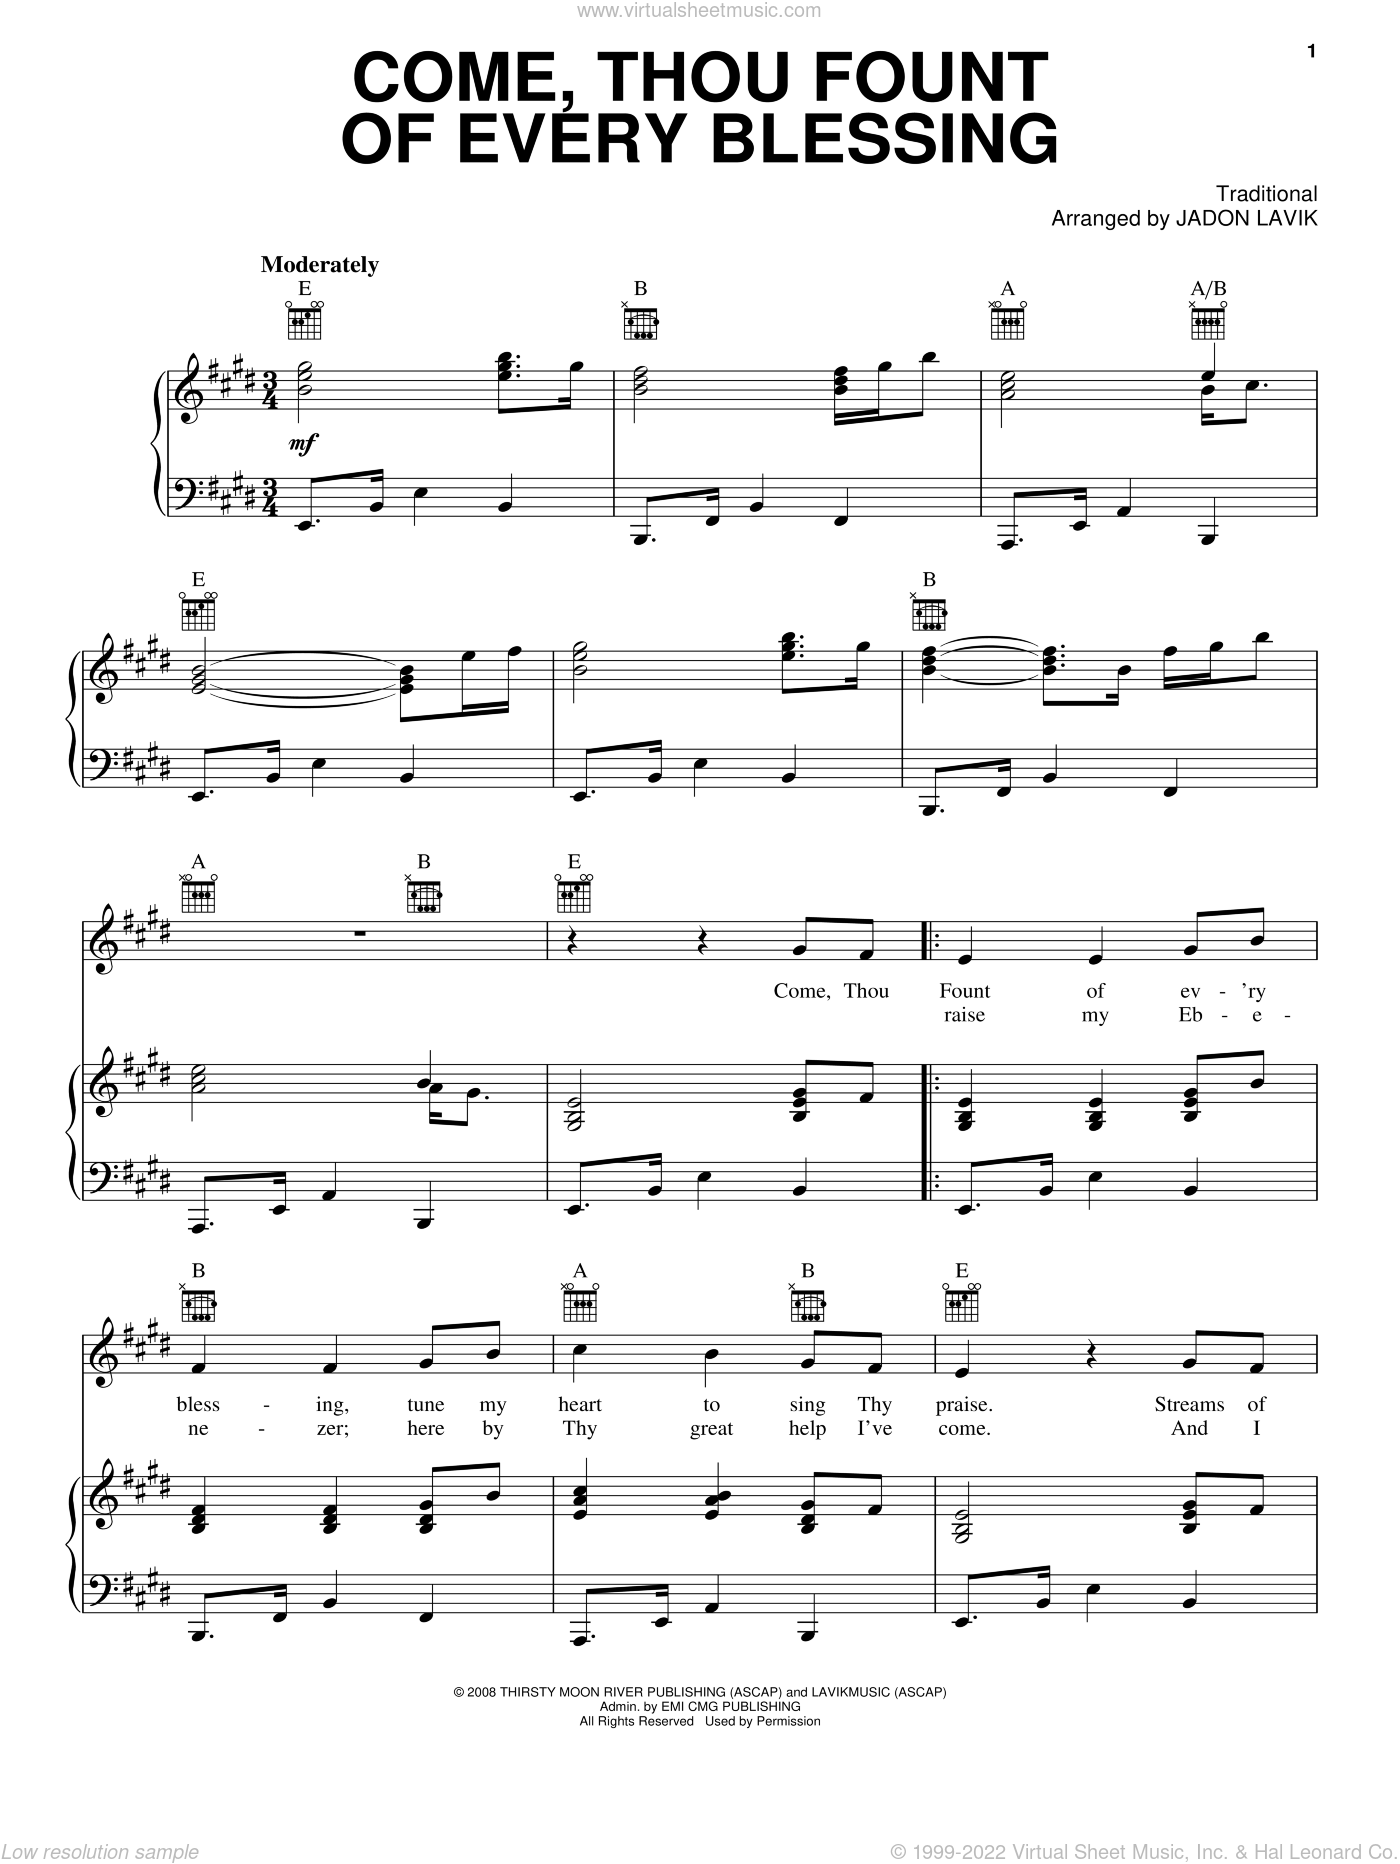 Lavik - Come Thou Fount Of Every Blessing sheet music for voice, piano